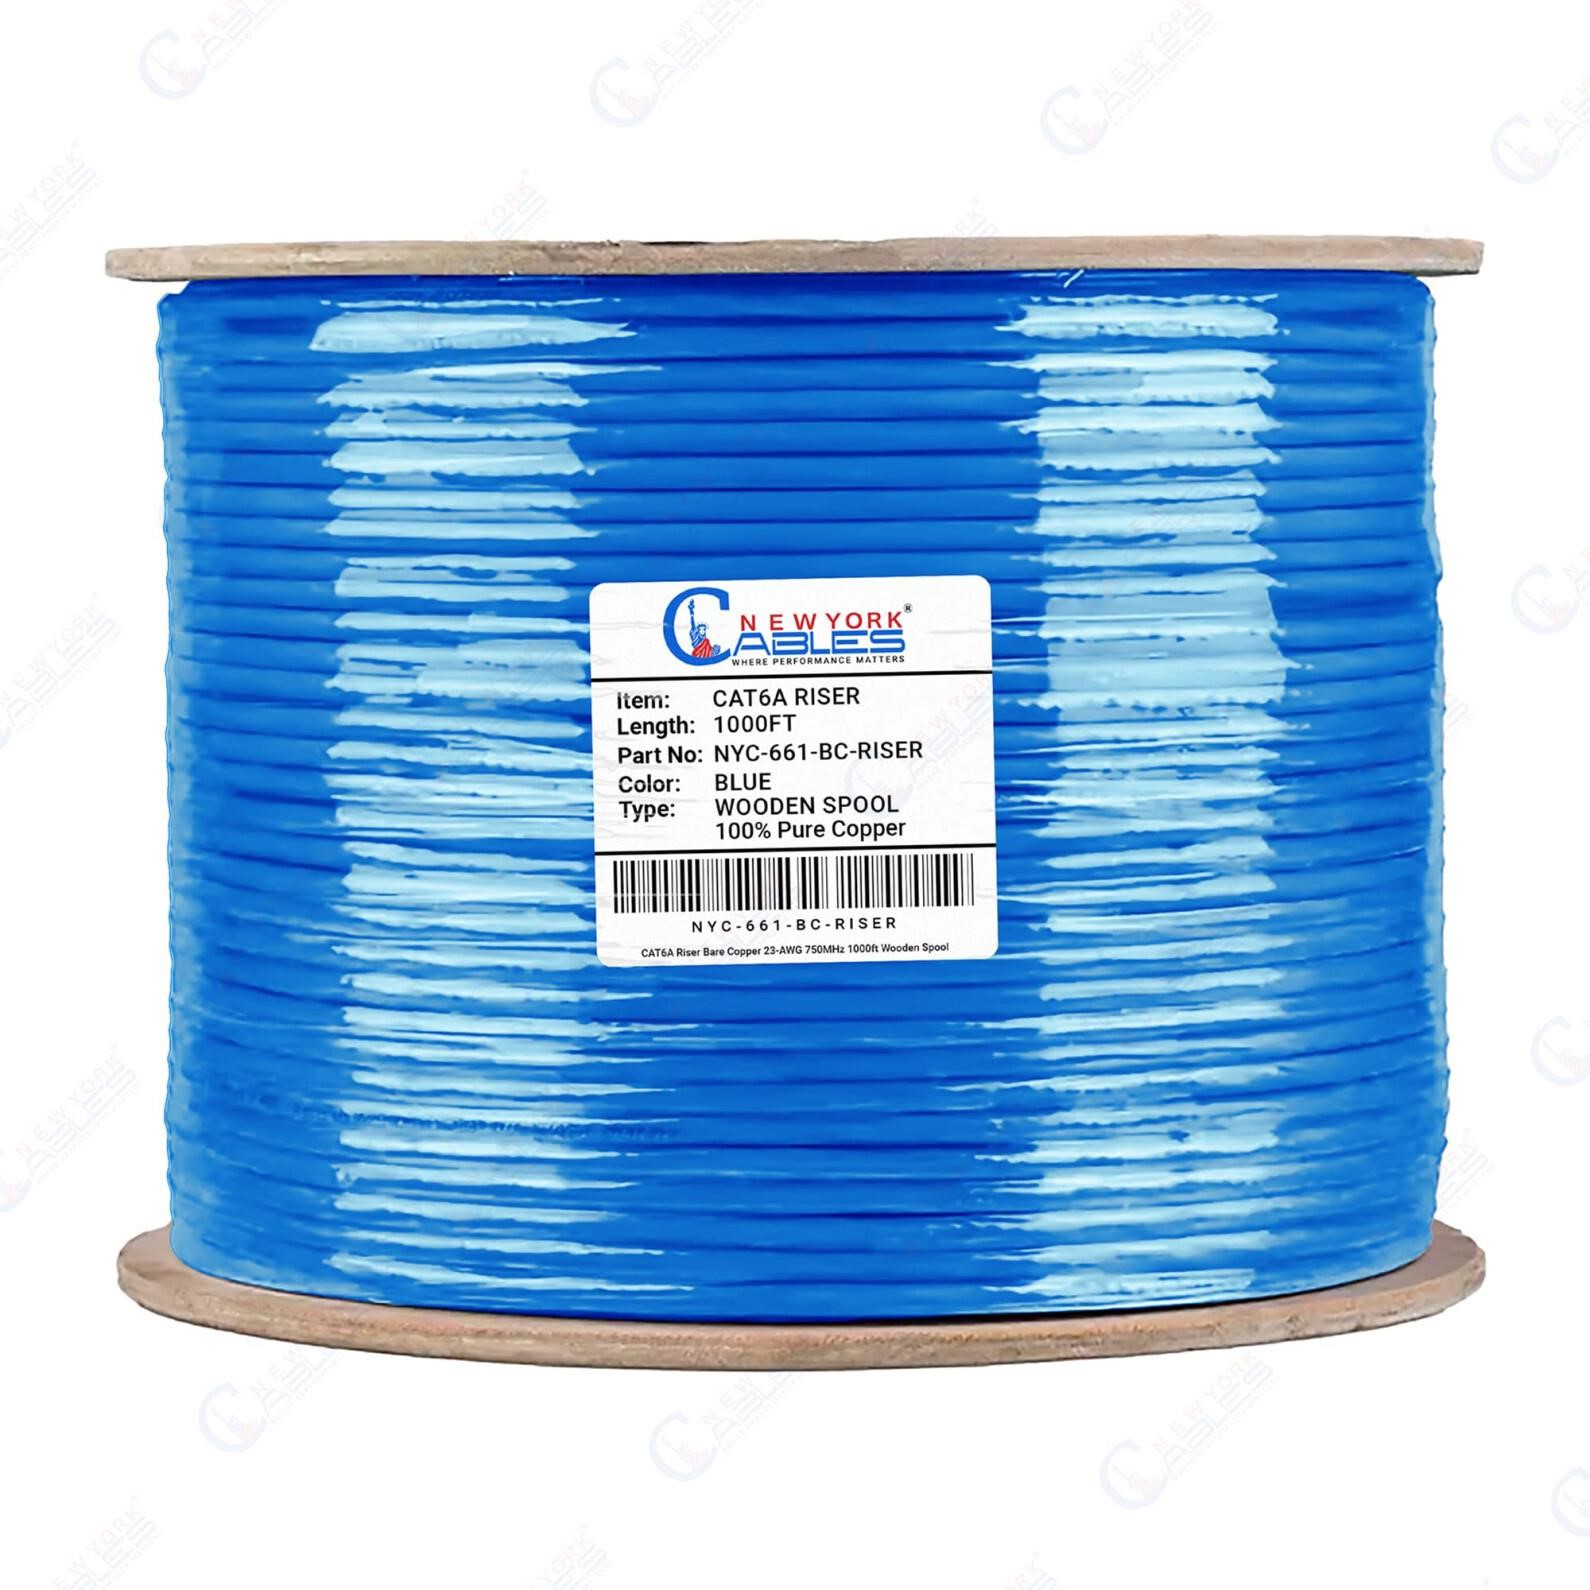 NewYork Cables Cat6a Riser Cable 1000ft - Certifie